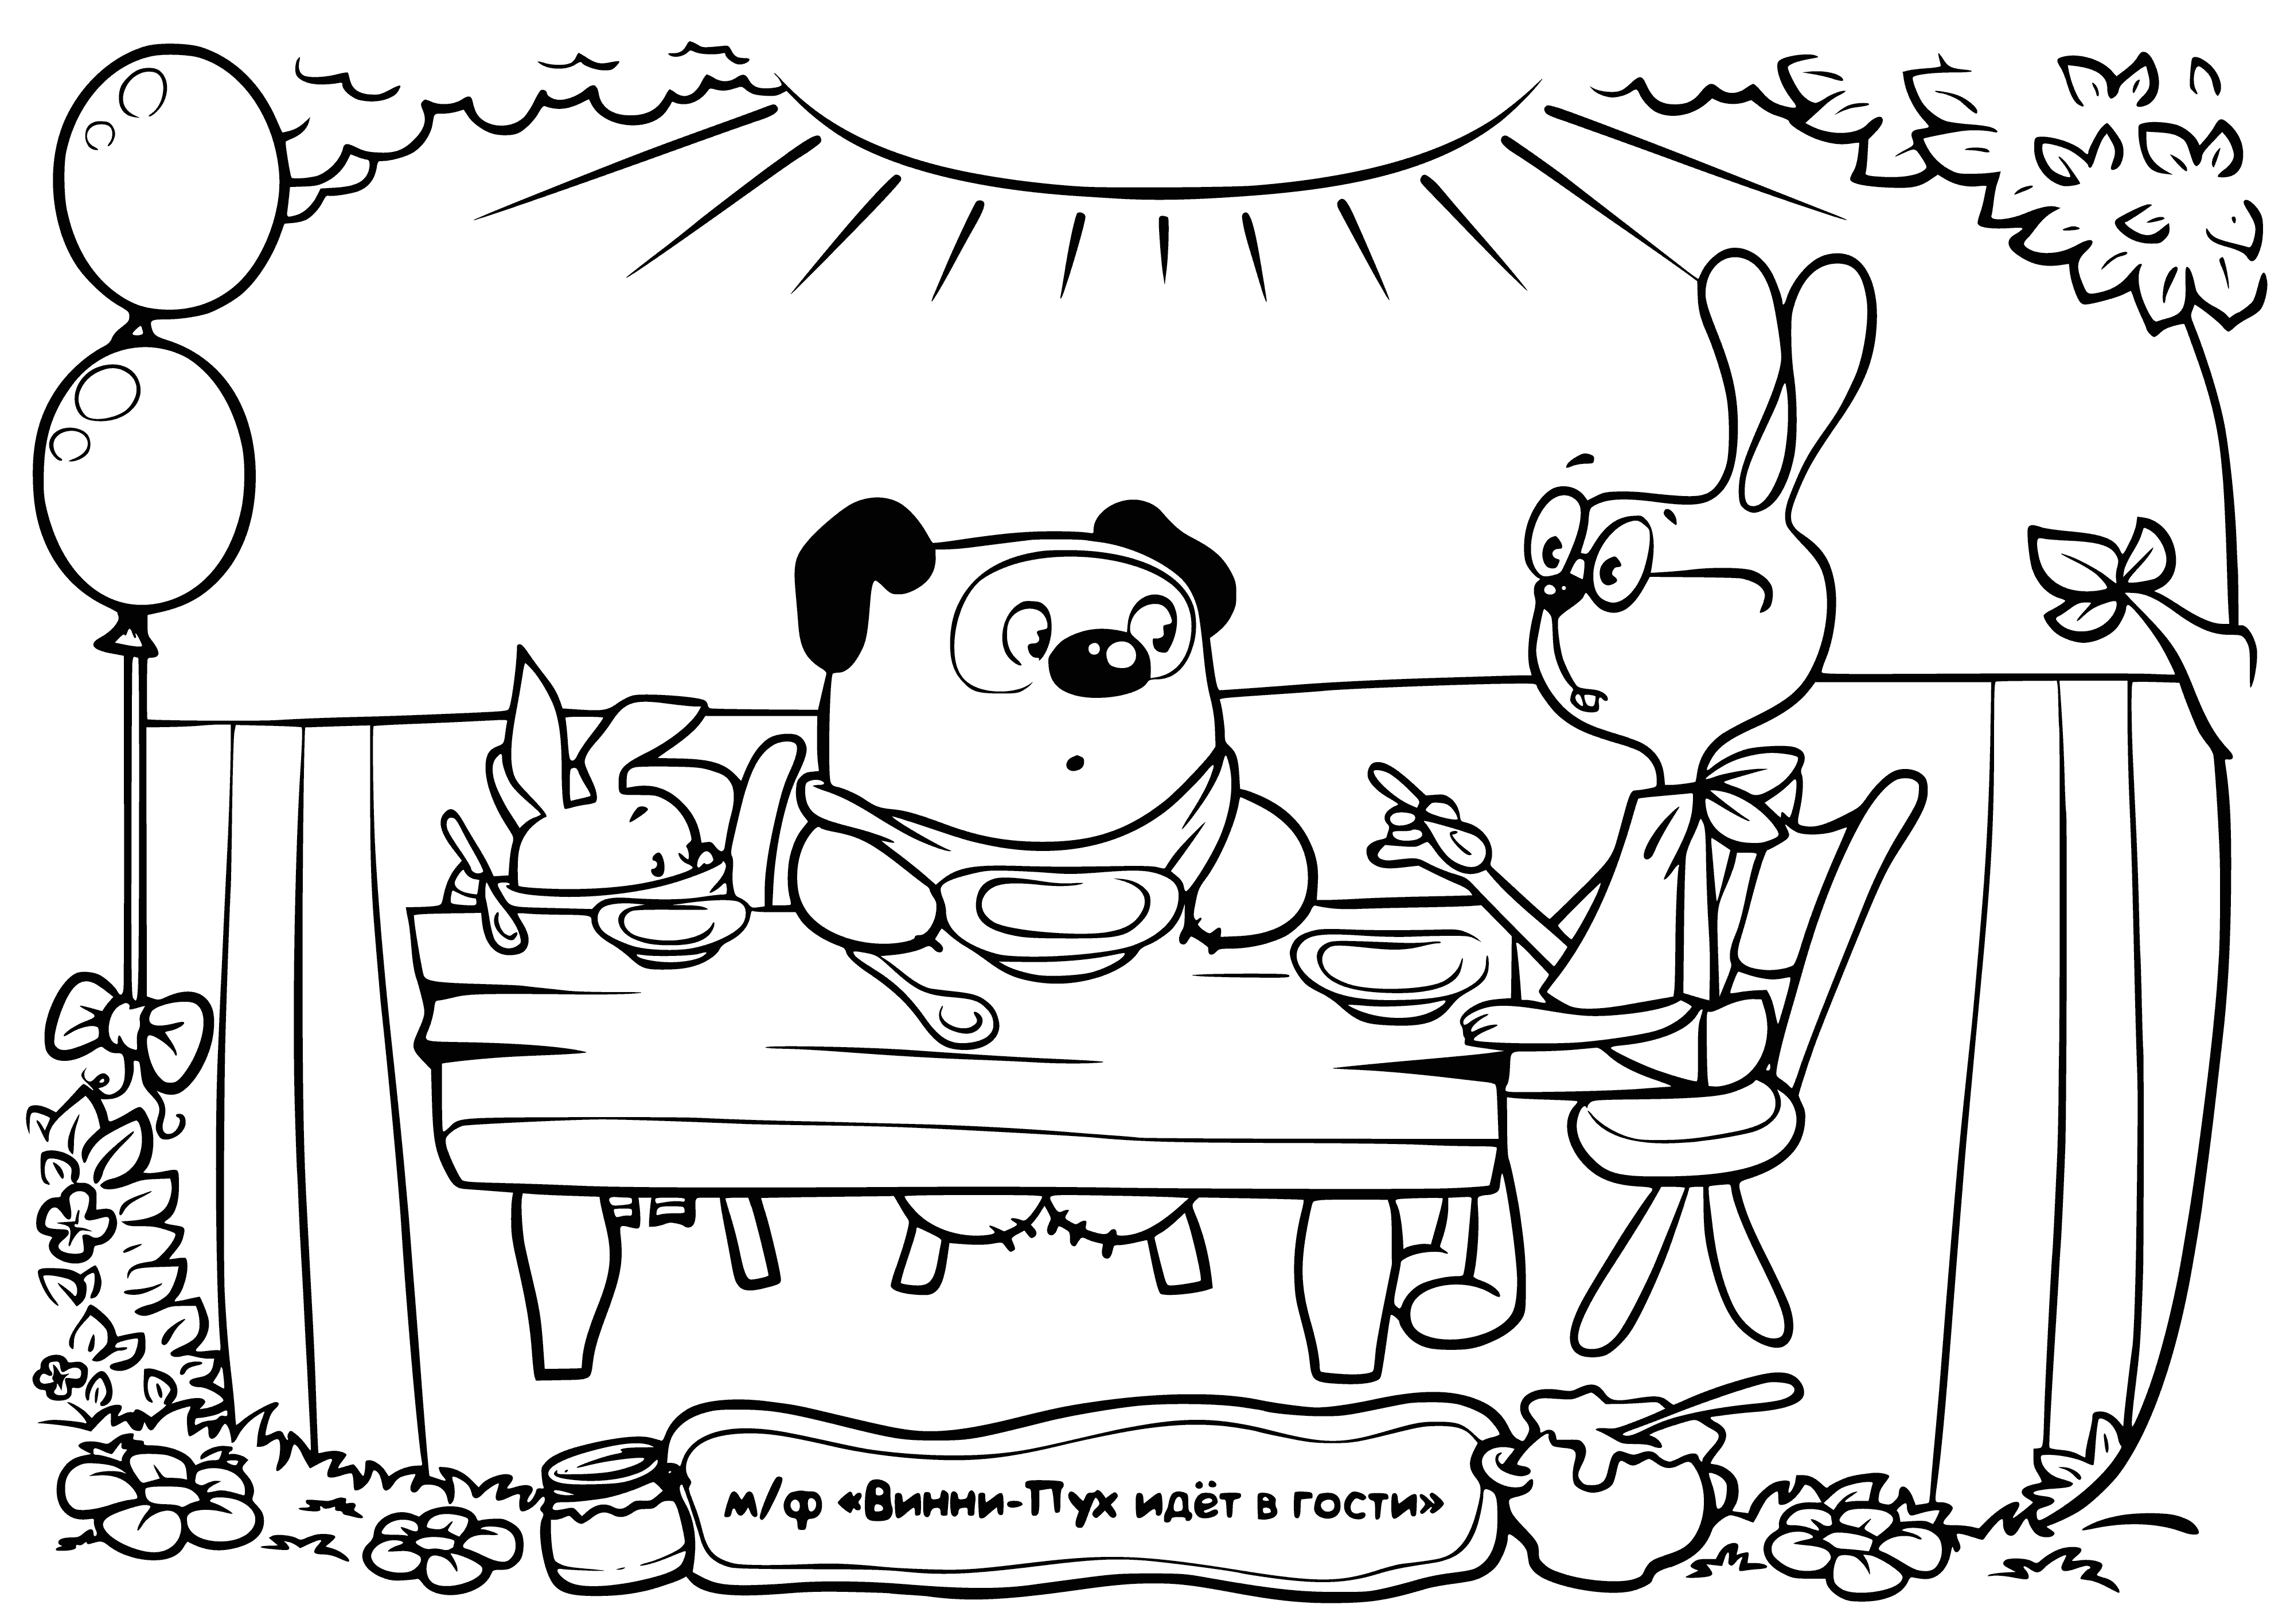 coloring page: Winnie, Piglet, Rabbit share a table: Winnie has honey, Piglet has tea, Rabbit has a carrot.